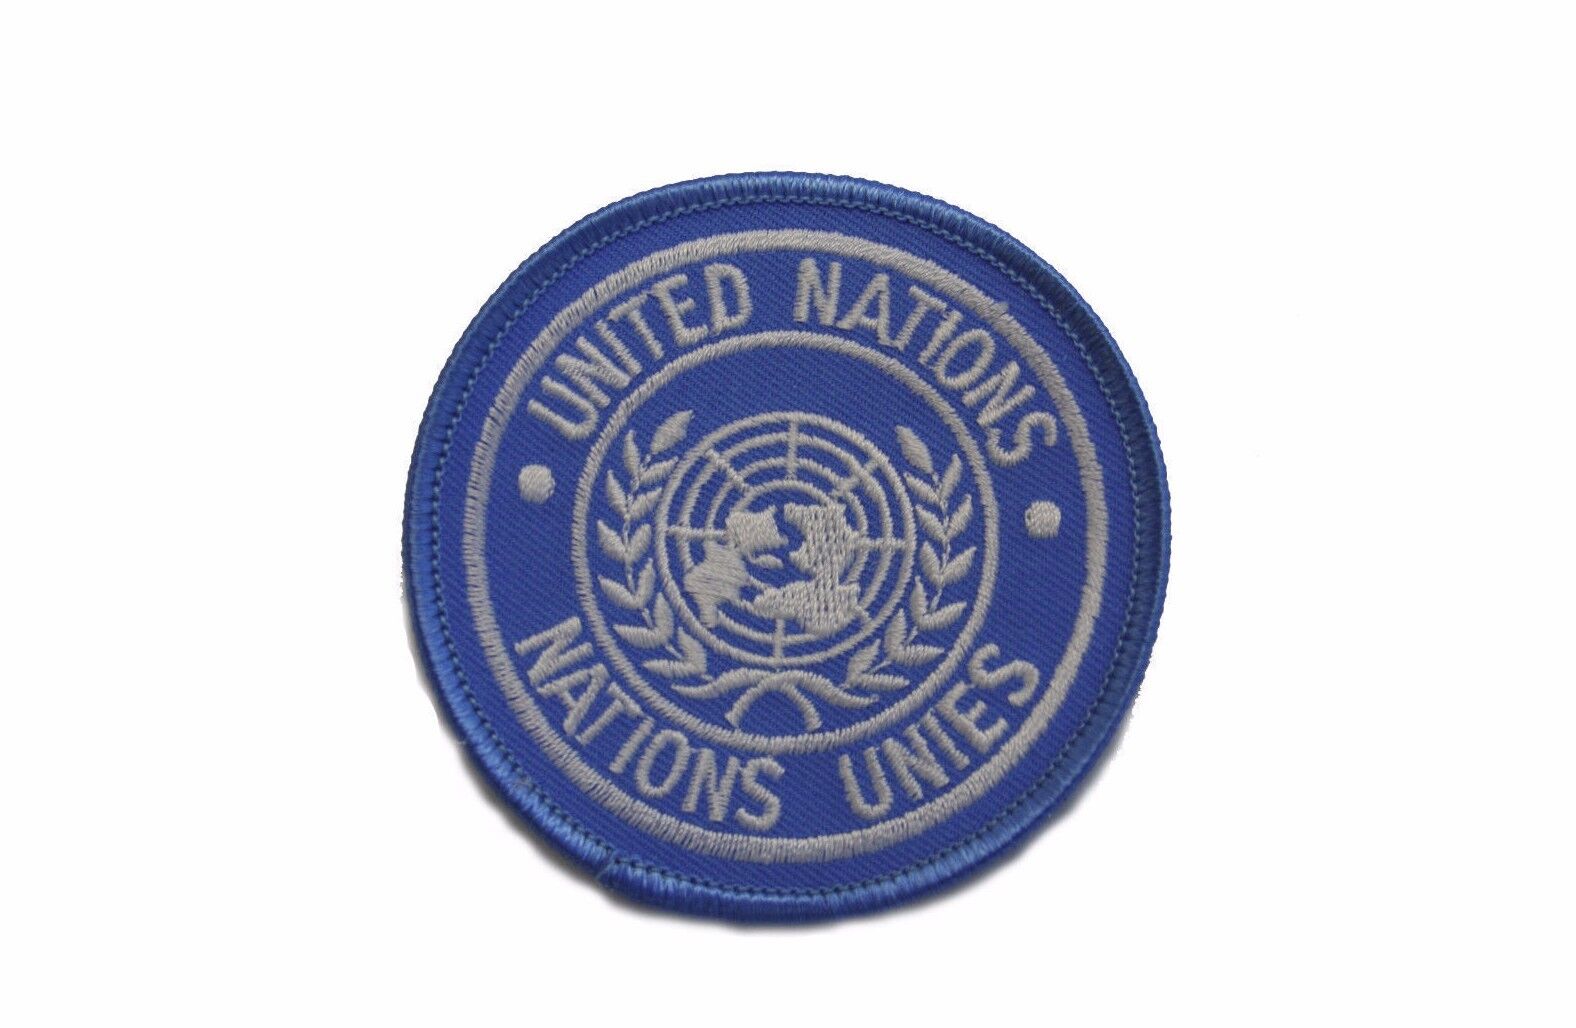 UNITED NATIONS BLUE EMBROIDERED PATCH